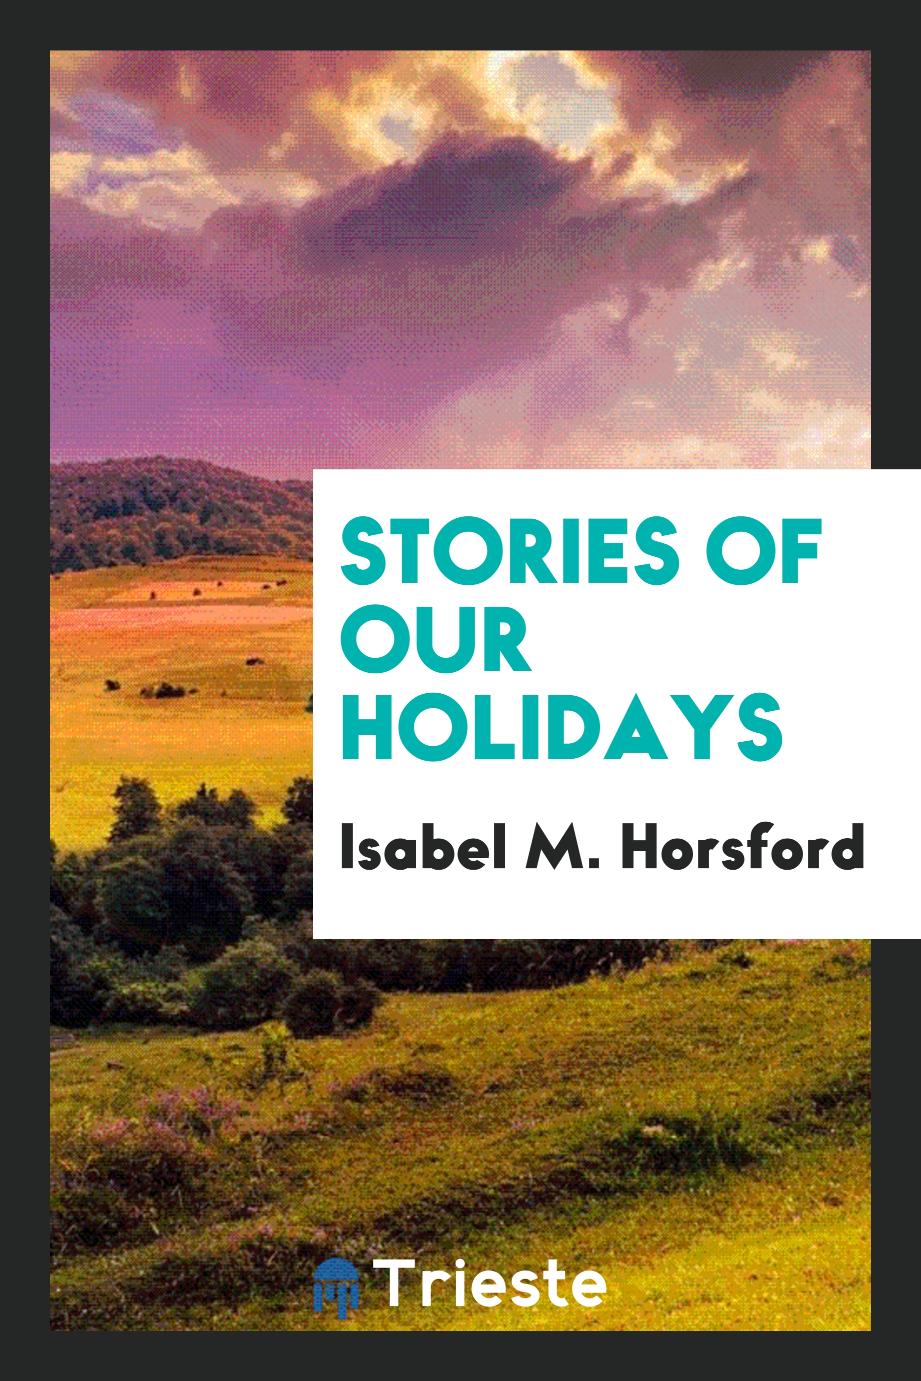 Stories of Our Holidays